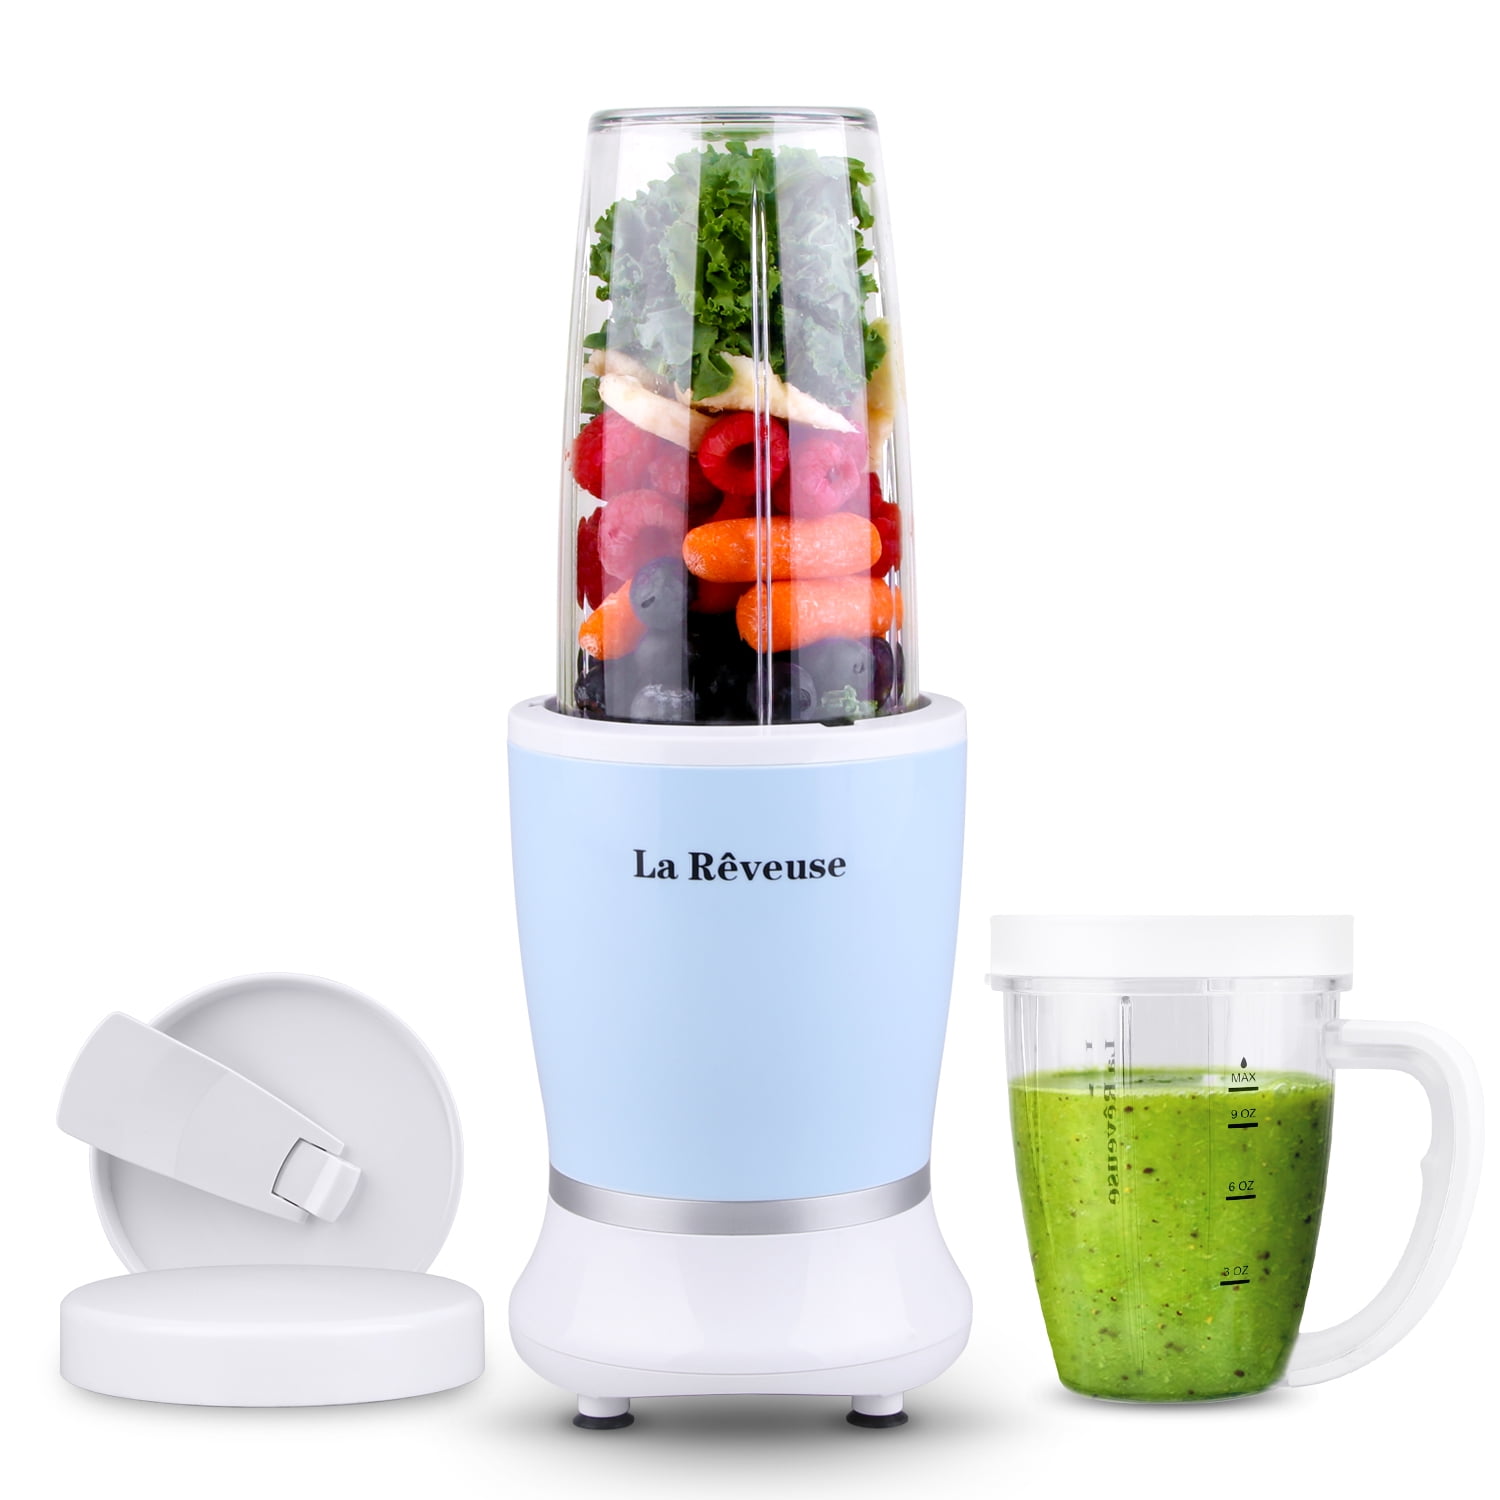 Blender for Shakes and Smoothies, Blending & Grinding with 24/10 OZ